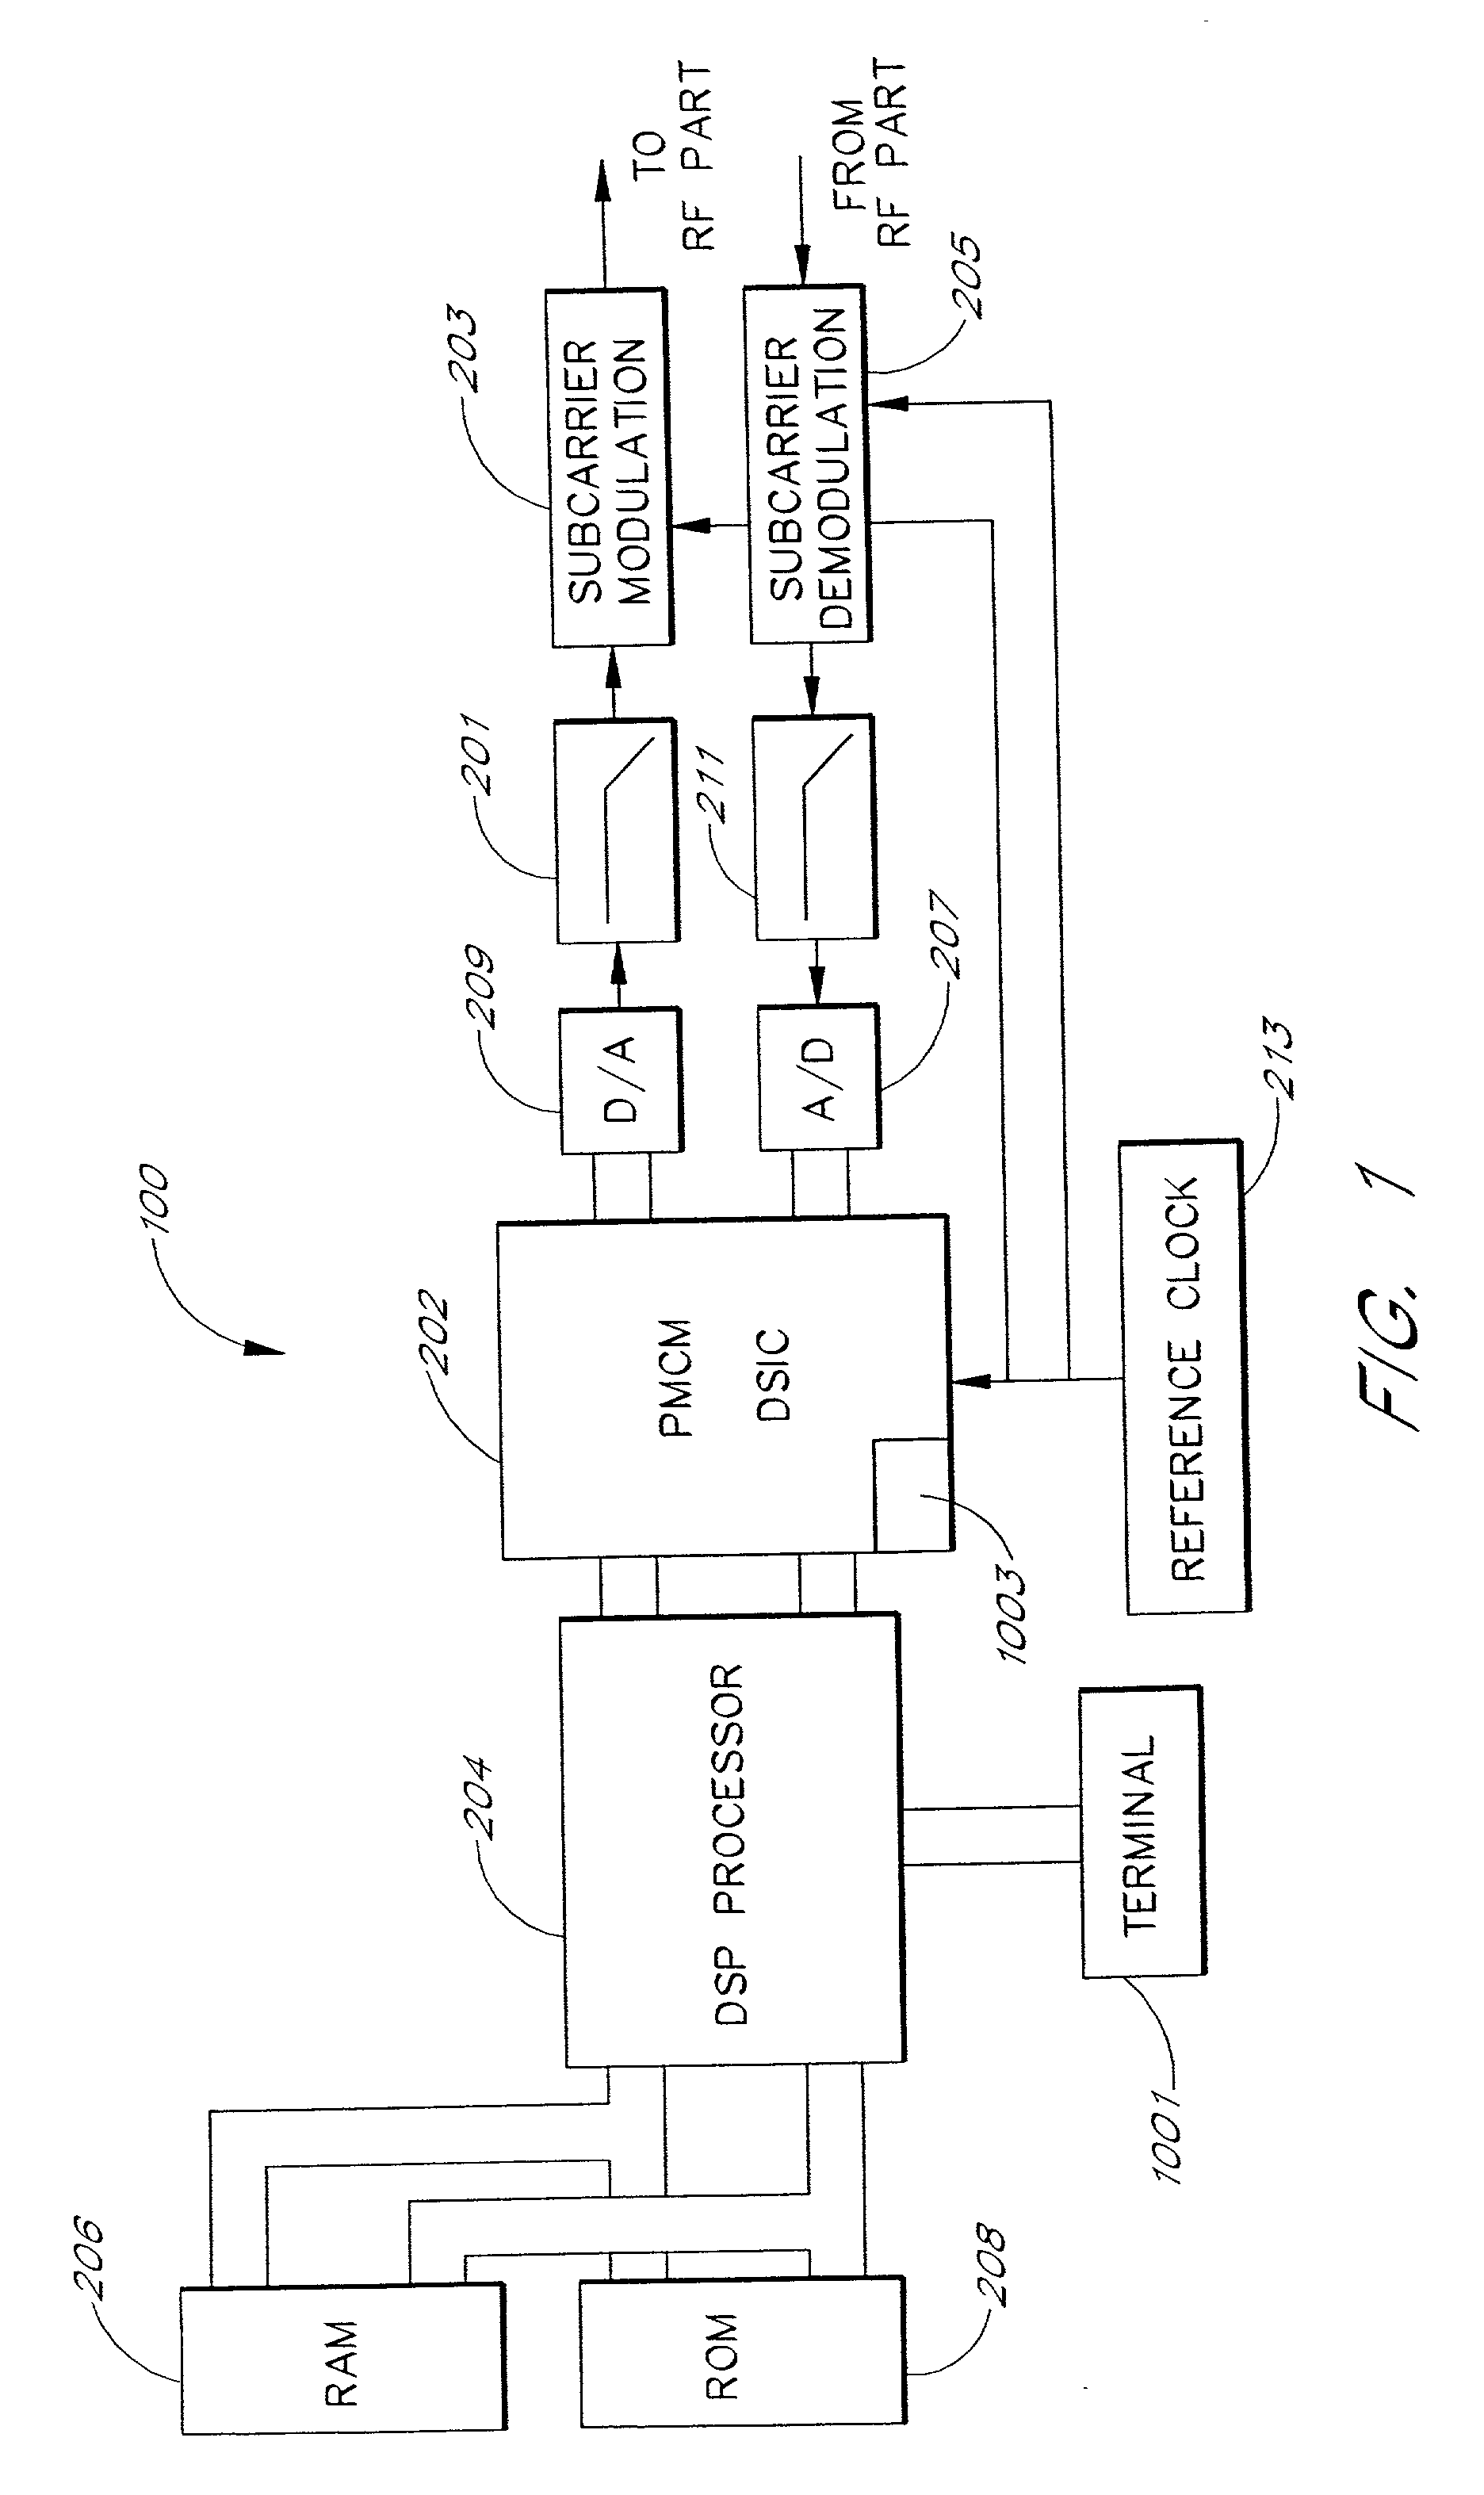 Programmable modem apparatus for transmitting and receiving digital data, design method and use method for the modem